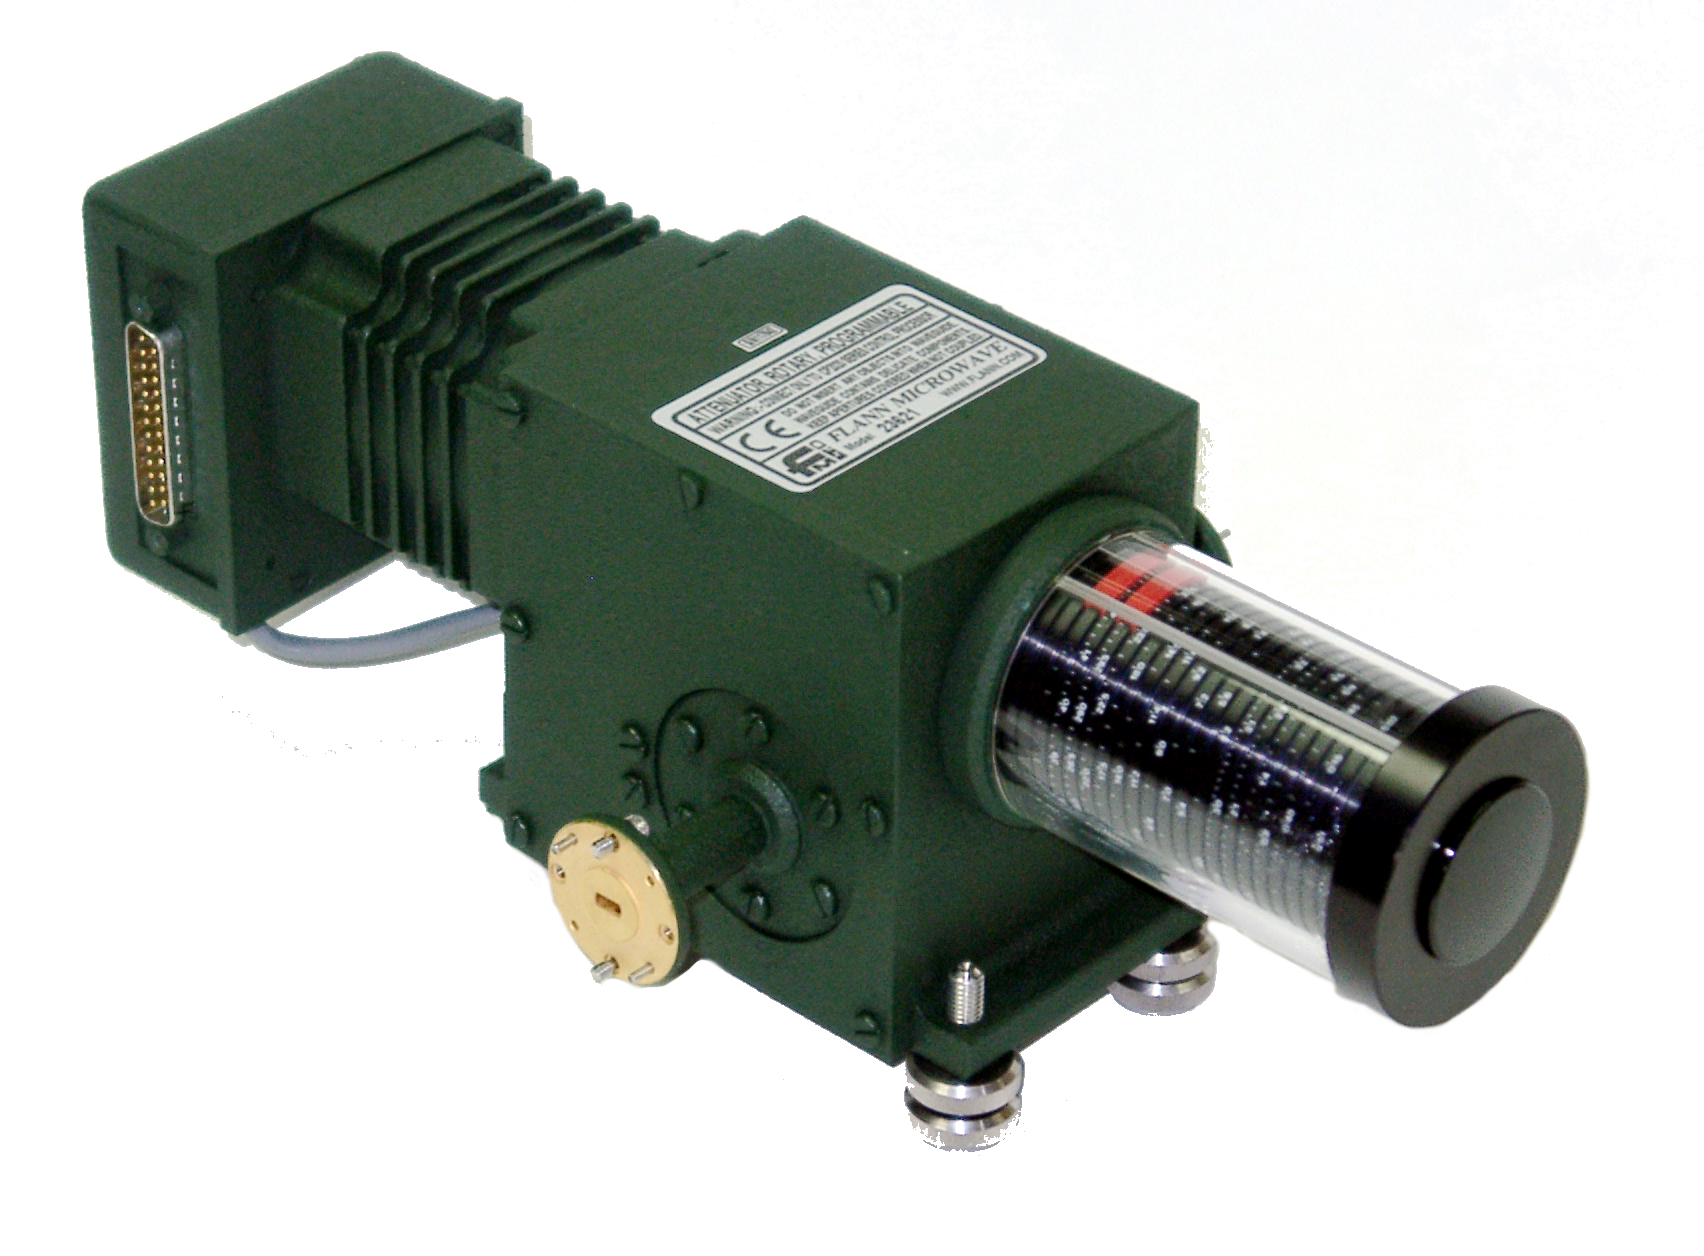 Programmable Rotary Vane Attenuator Series 621 Manufactured in Bodmin, Cornwall, UK